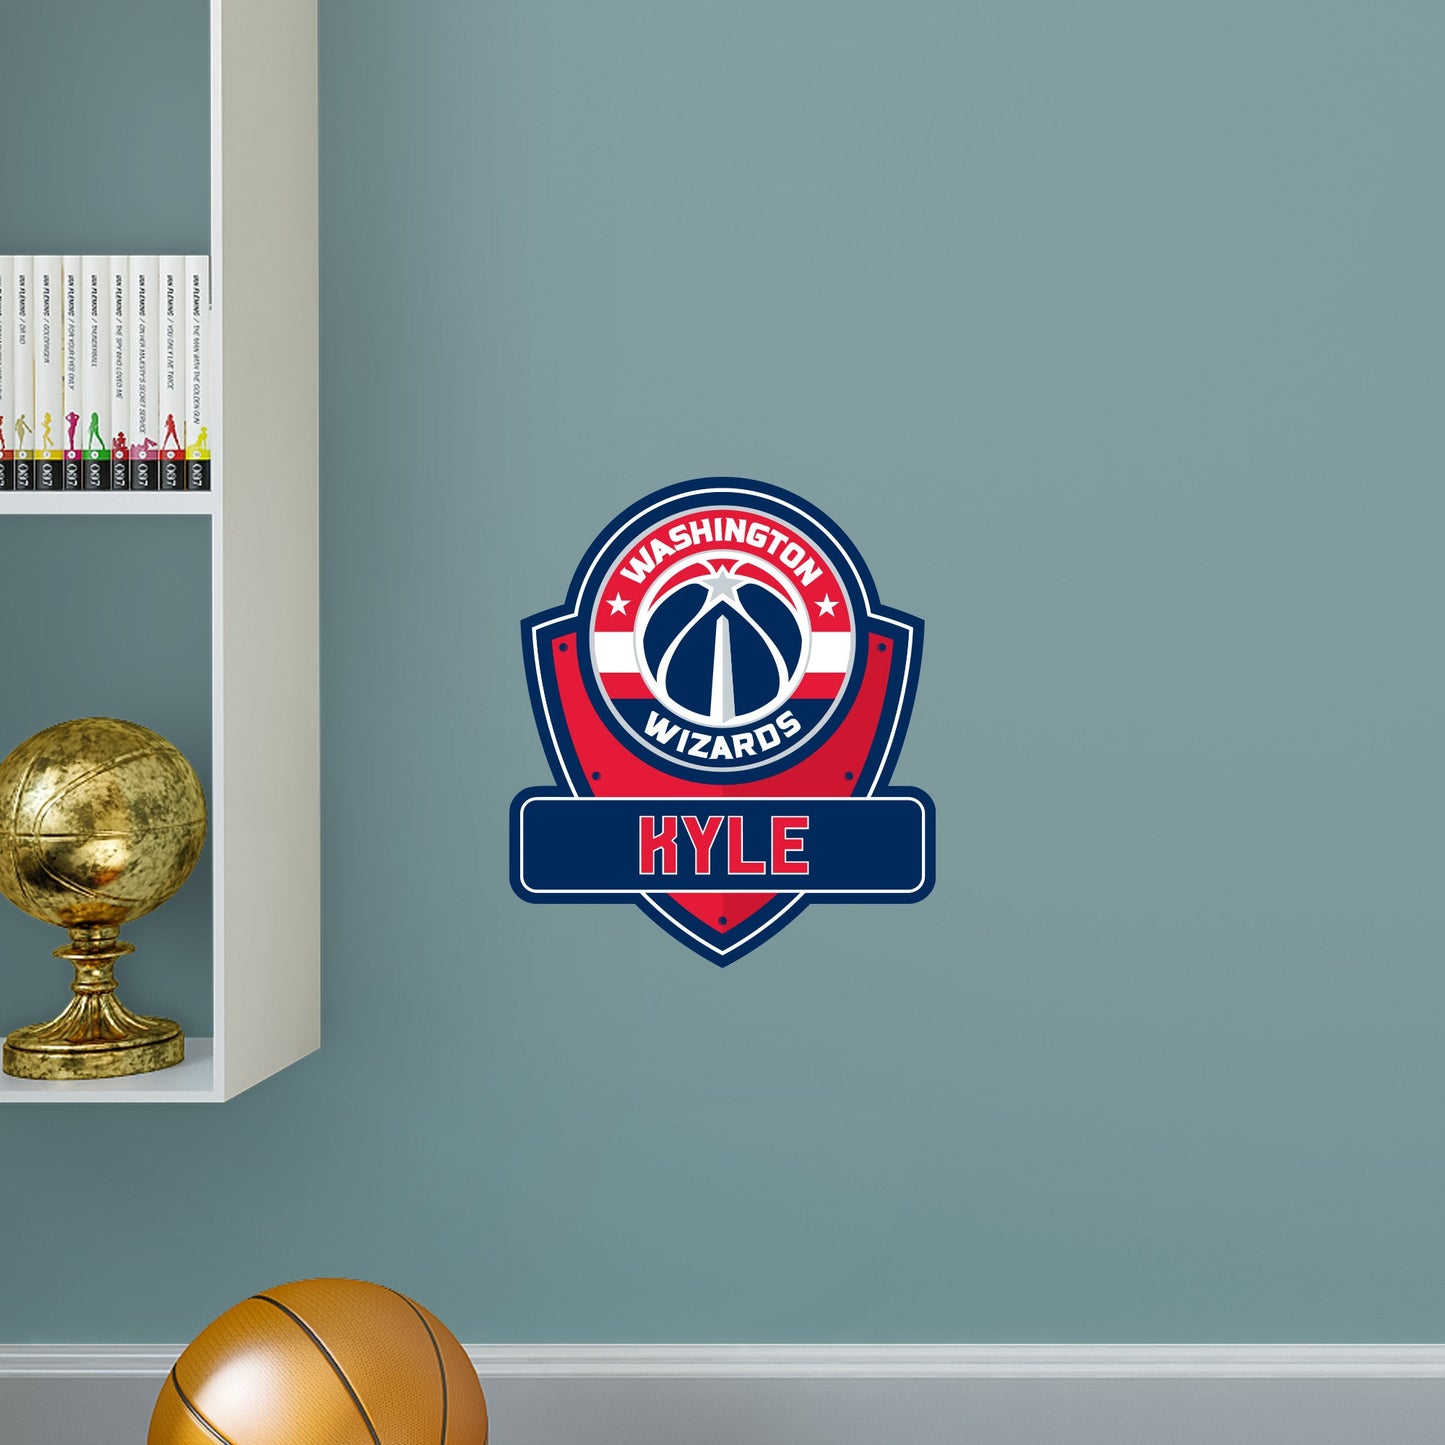 Washington Wizards: Badge Personalized Name - Officially Licensed NBA Removable Adhesive Decal